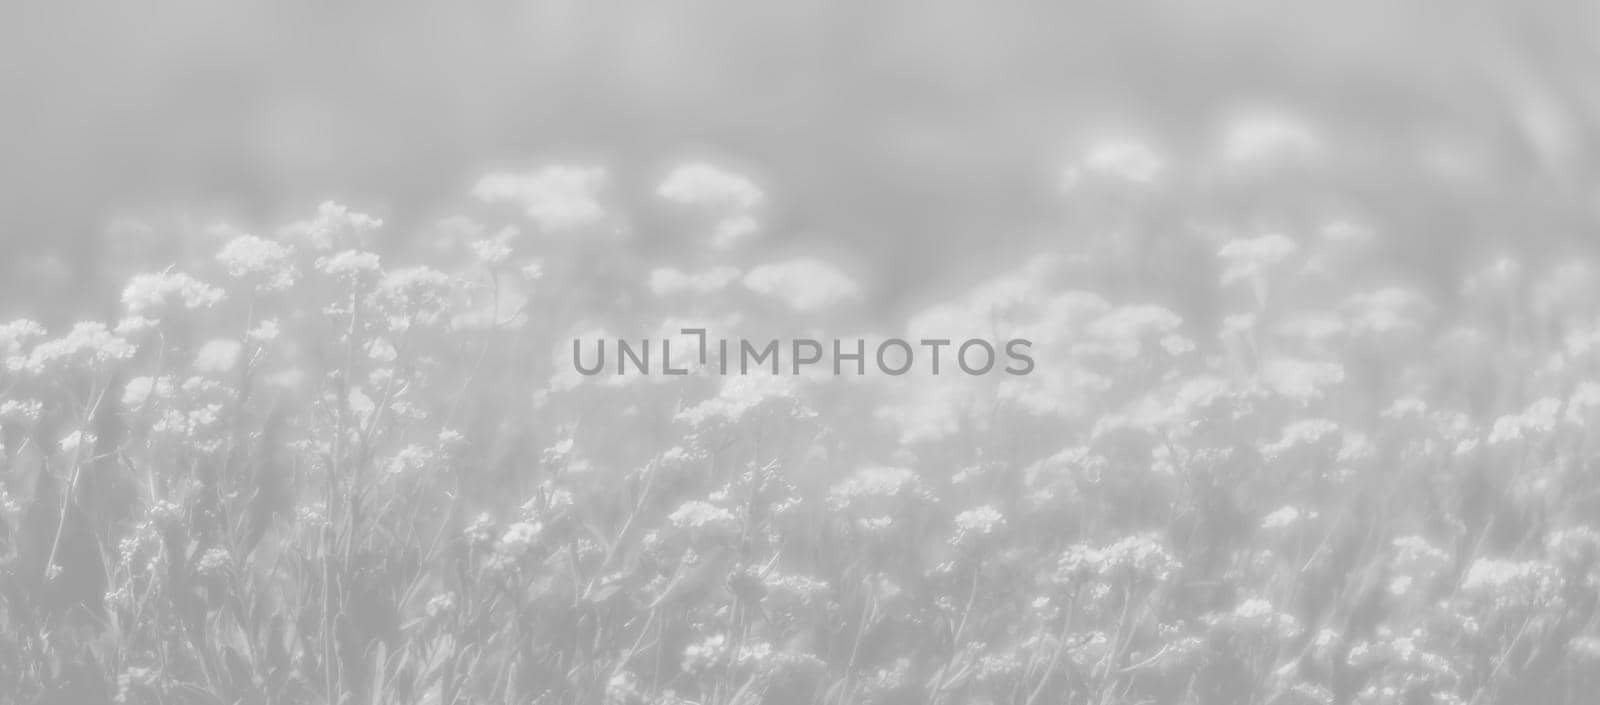 Natural background and texture. Soft focus image of small flowers of aurinia saxatilis in light gray tonality